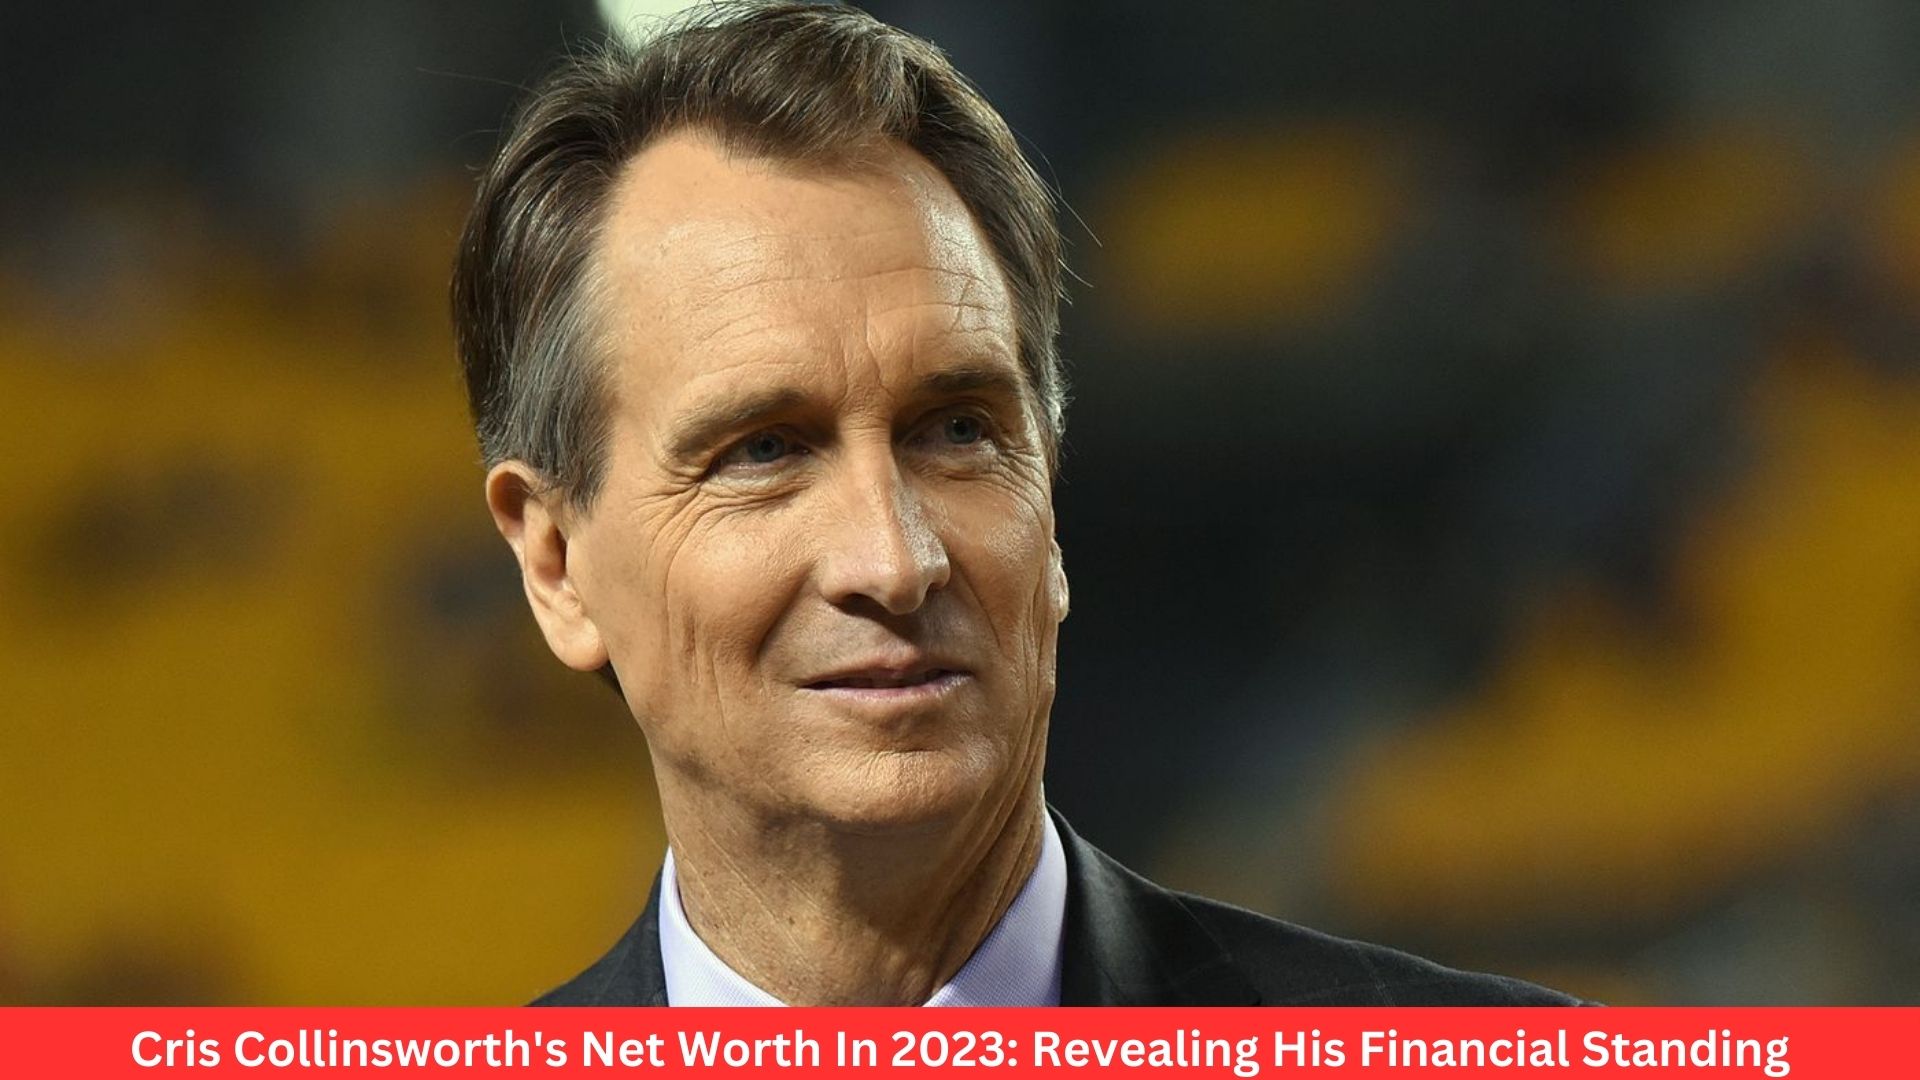 Cris Collinsworth's Net Worth In 2023: Revealing His Financial Standing